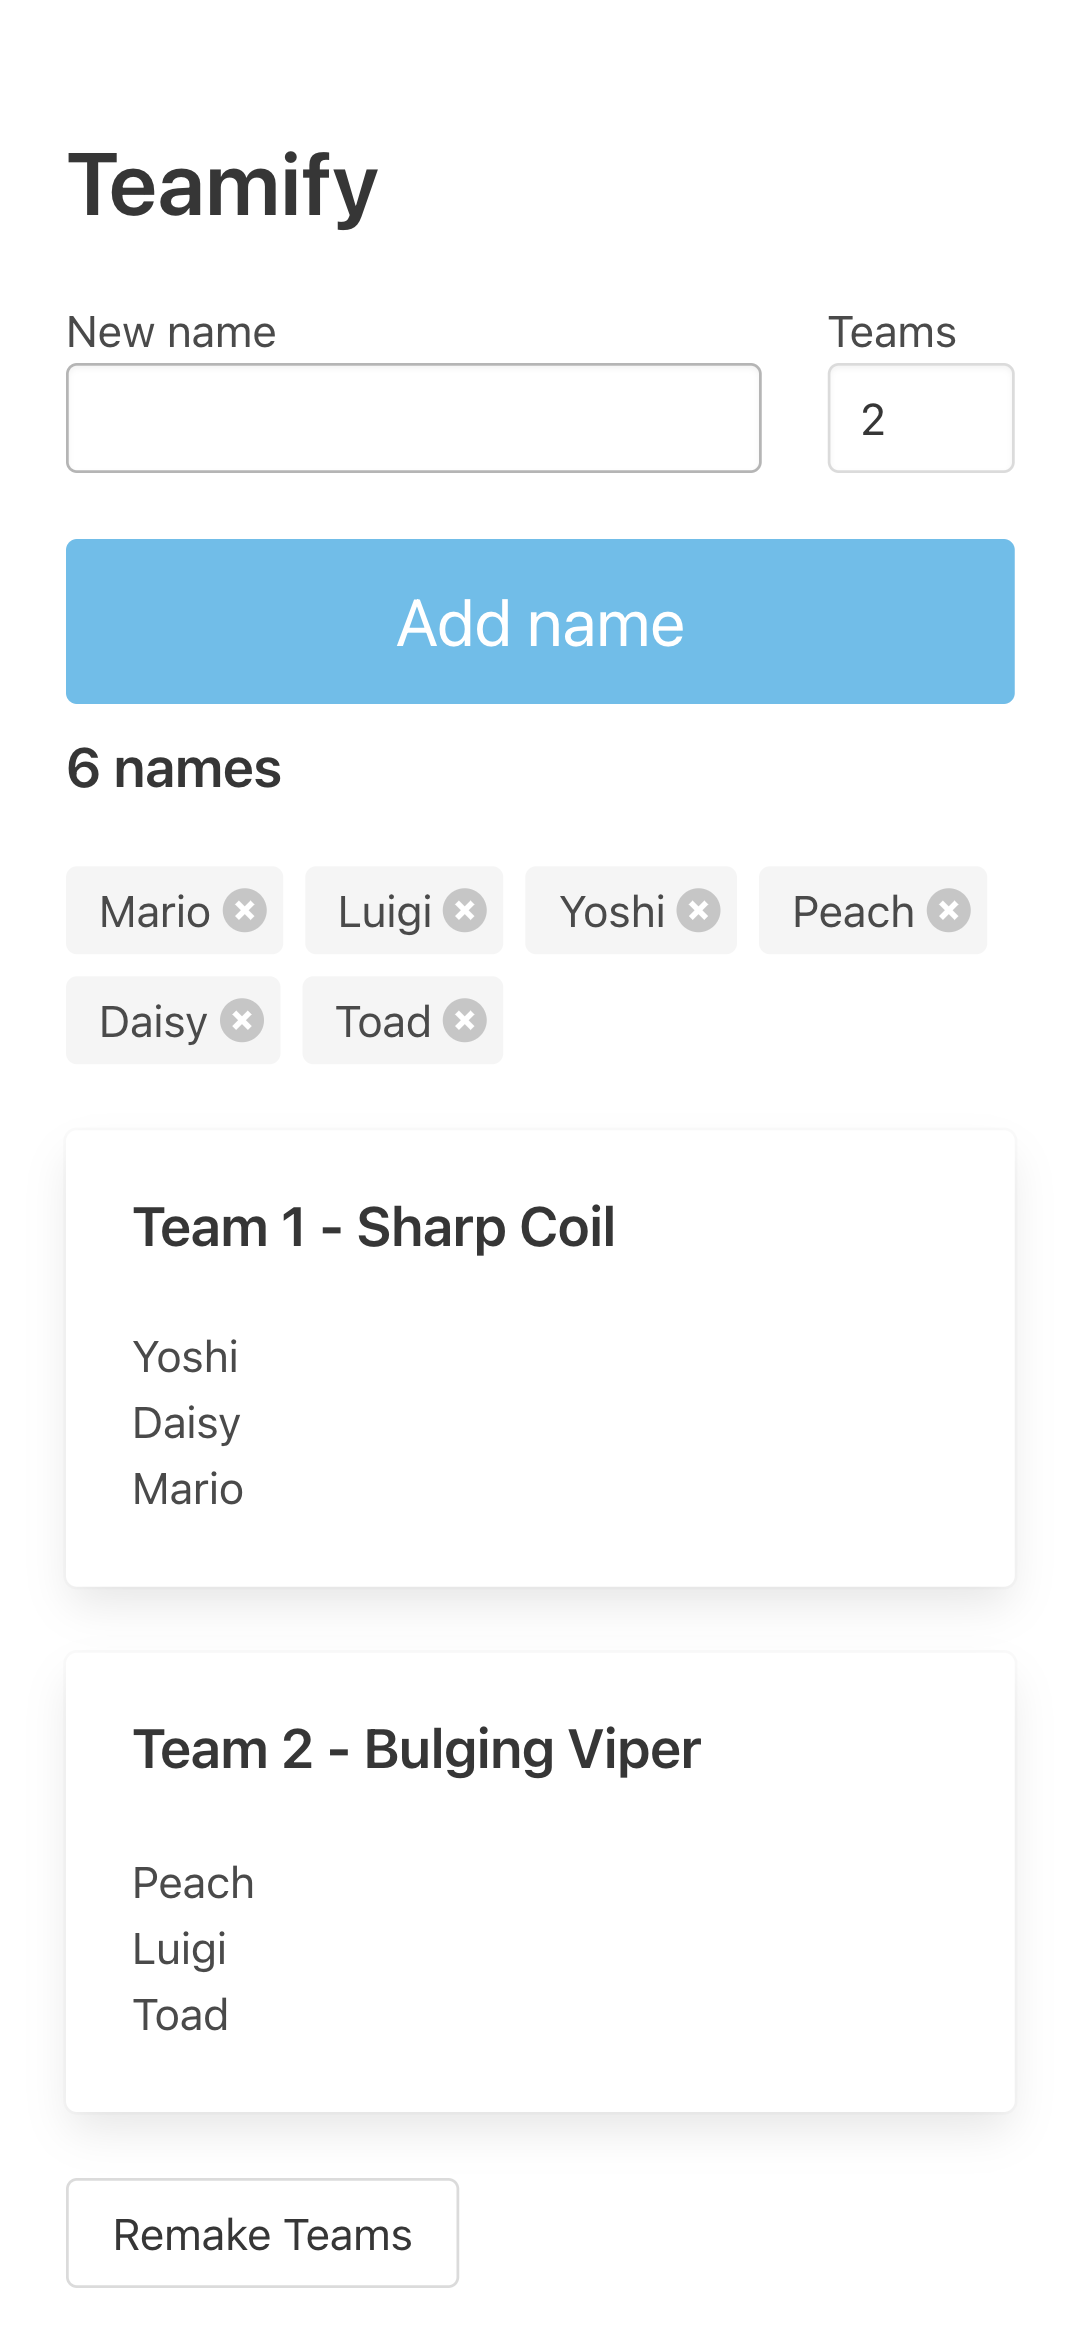 Teamify app with two teams generated from six names